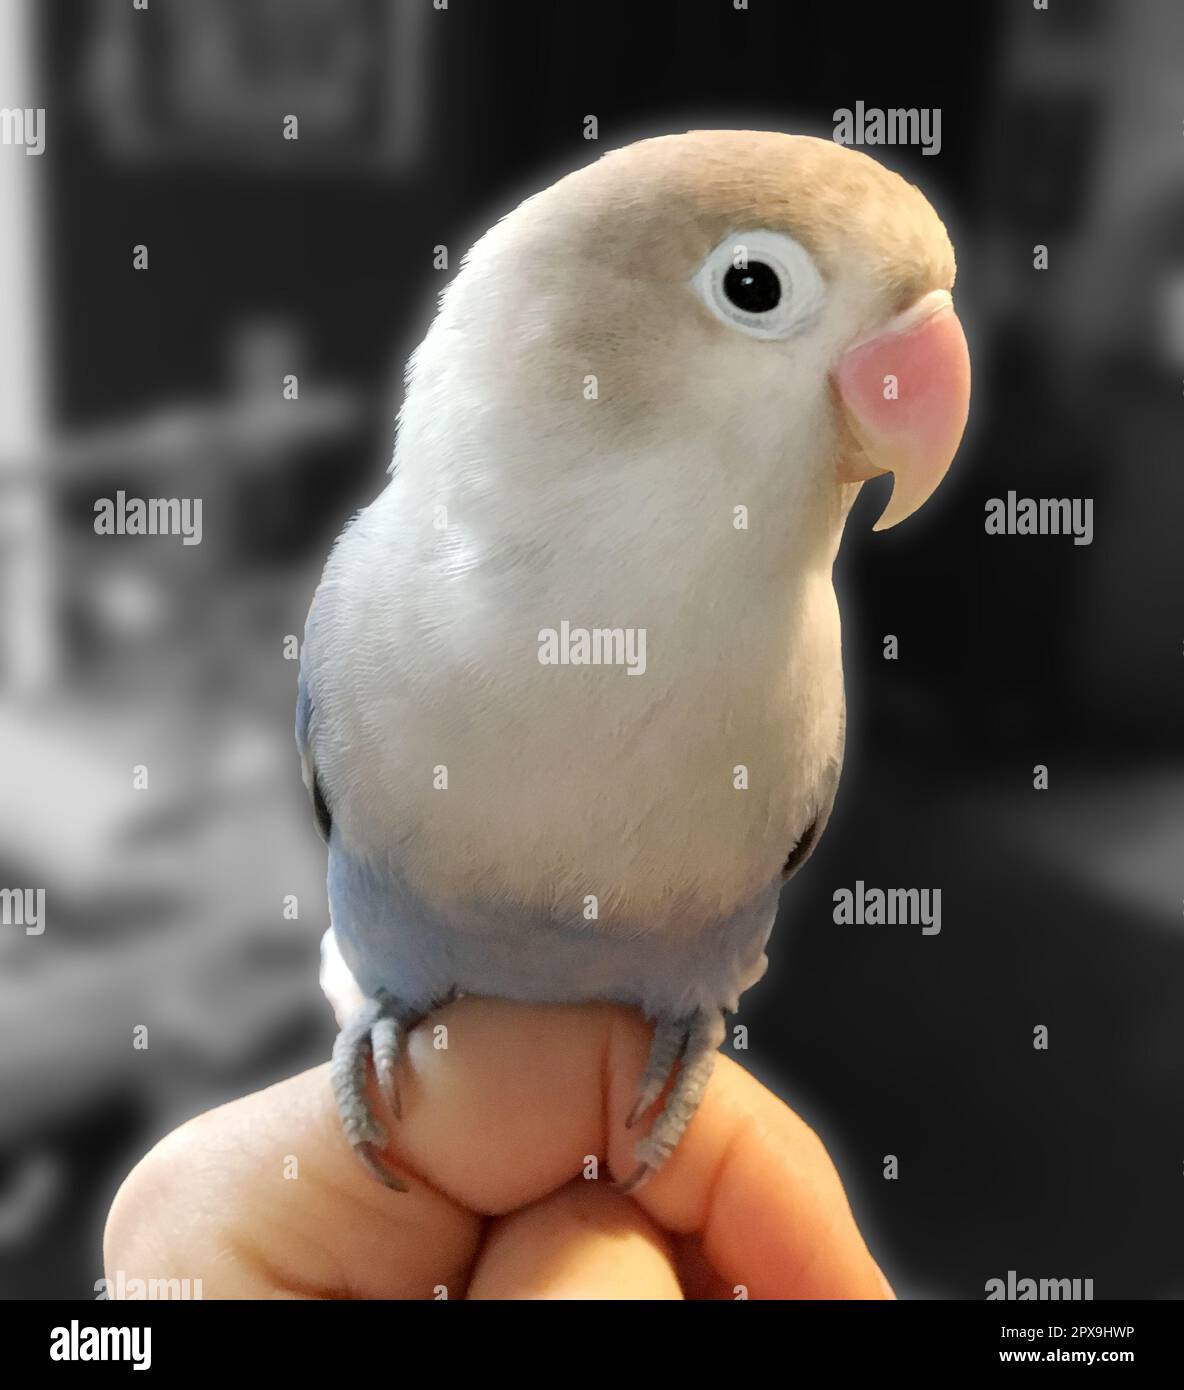 A pale blue fisheri lovebird perched on an human hand Stock Photo